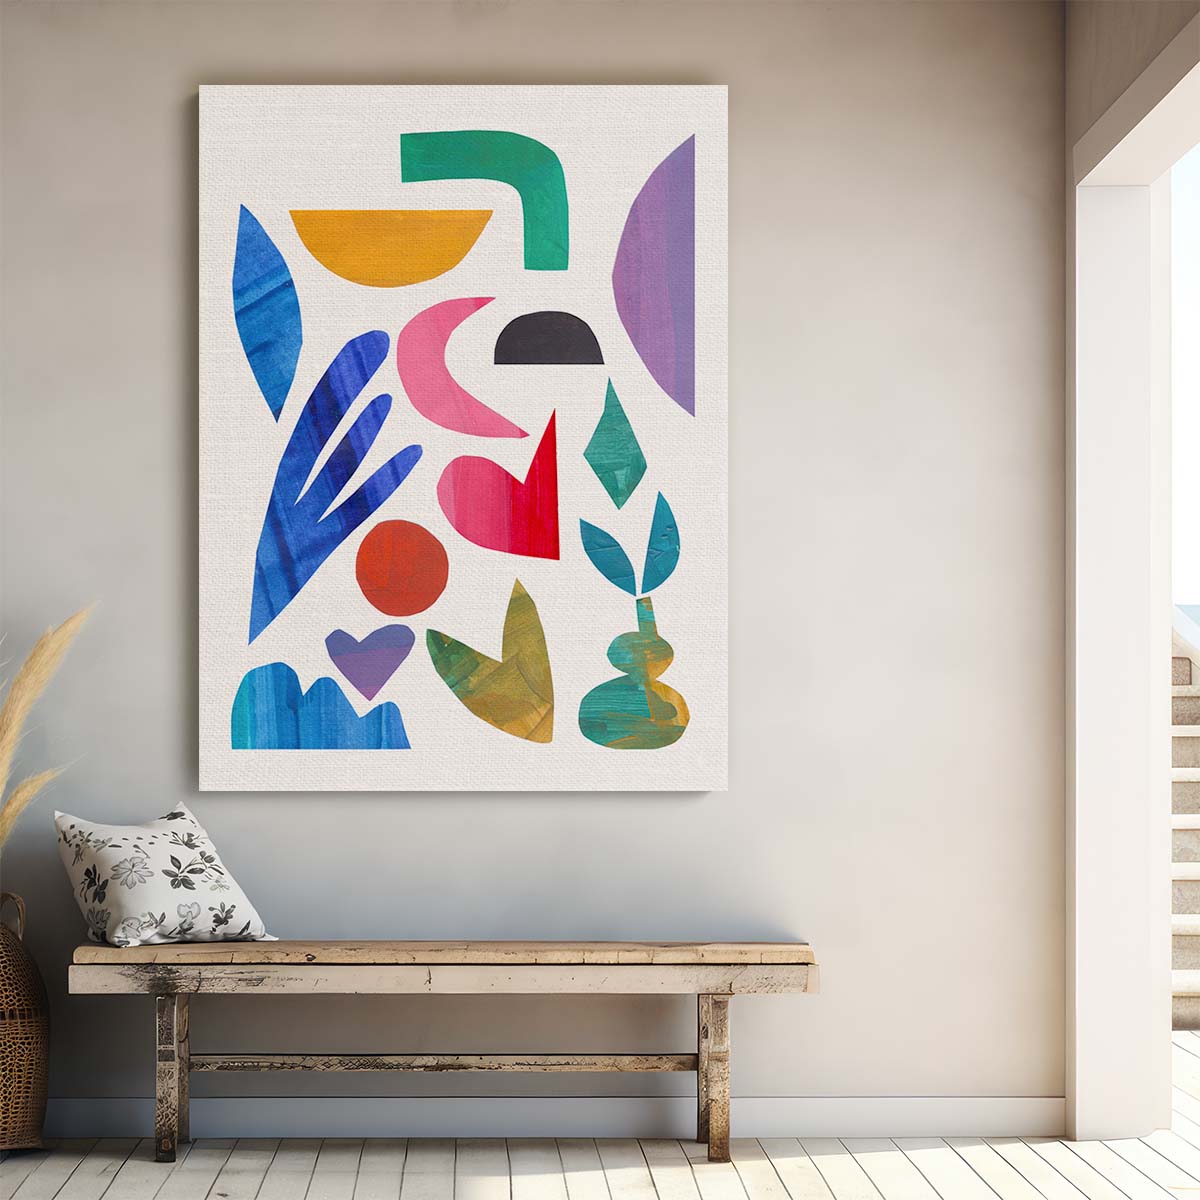 Ejaaz Haniff Colorful Geometric Illustration Abstract Wall Art Poster by Luxuriance Designs, made in USA